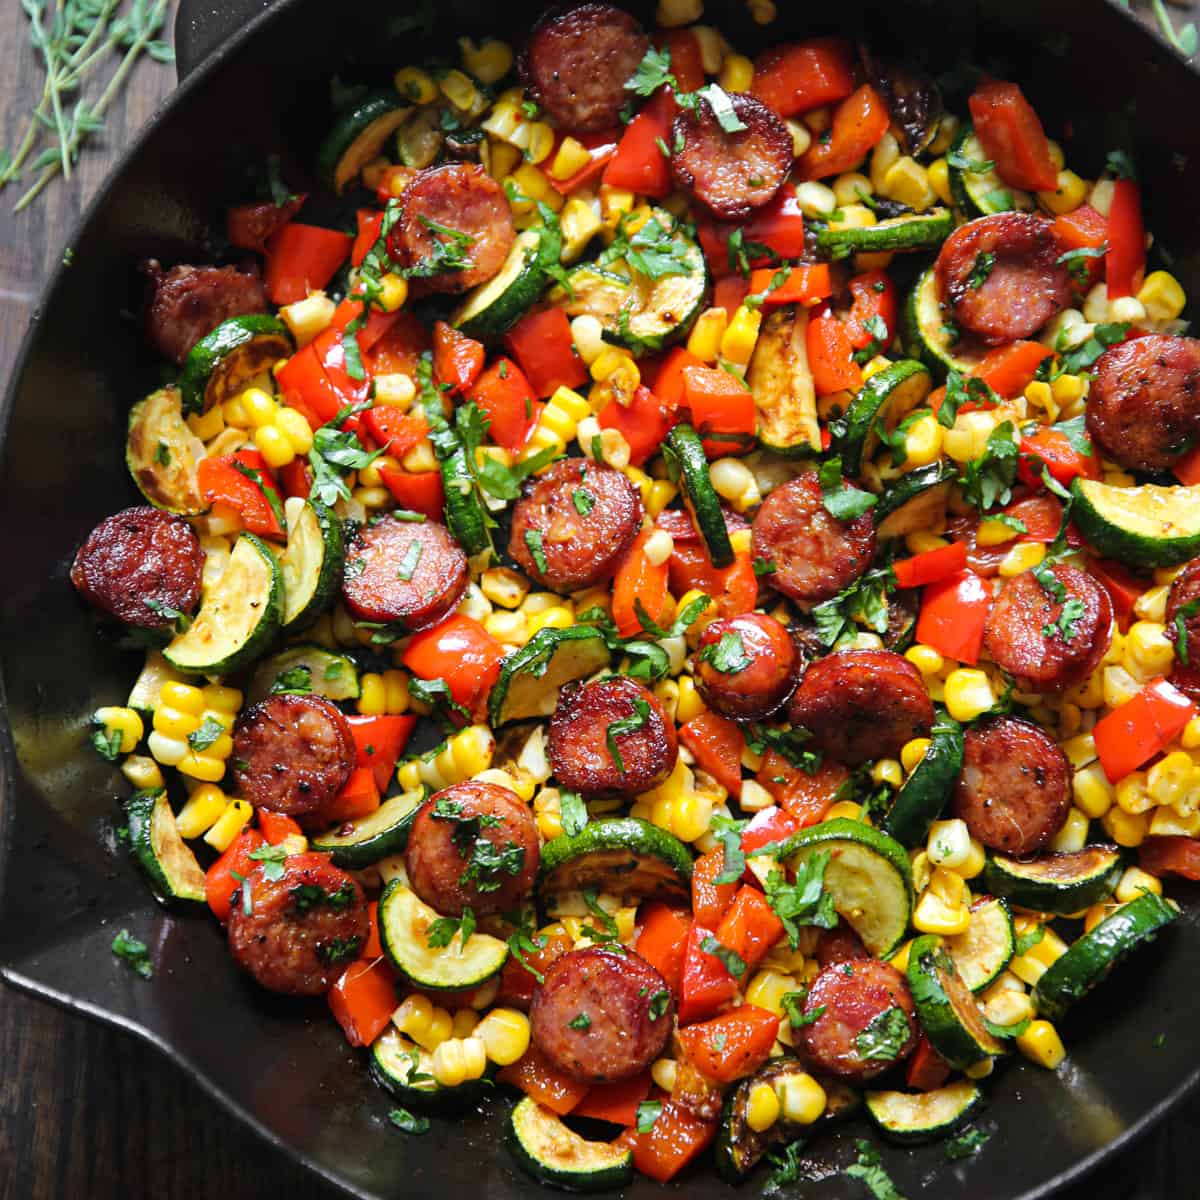 Italian Sausage and Peppers Skillet Recipe